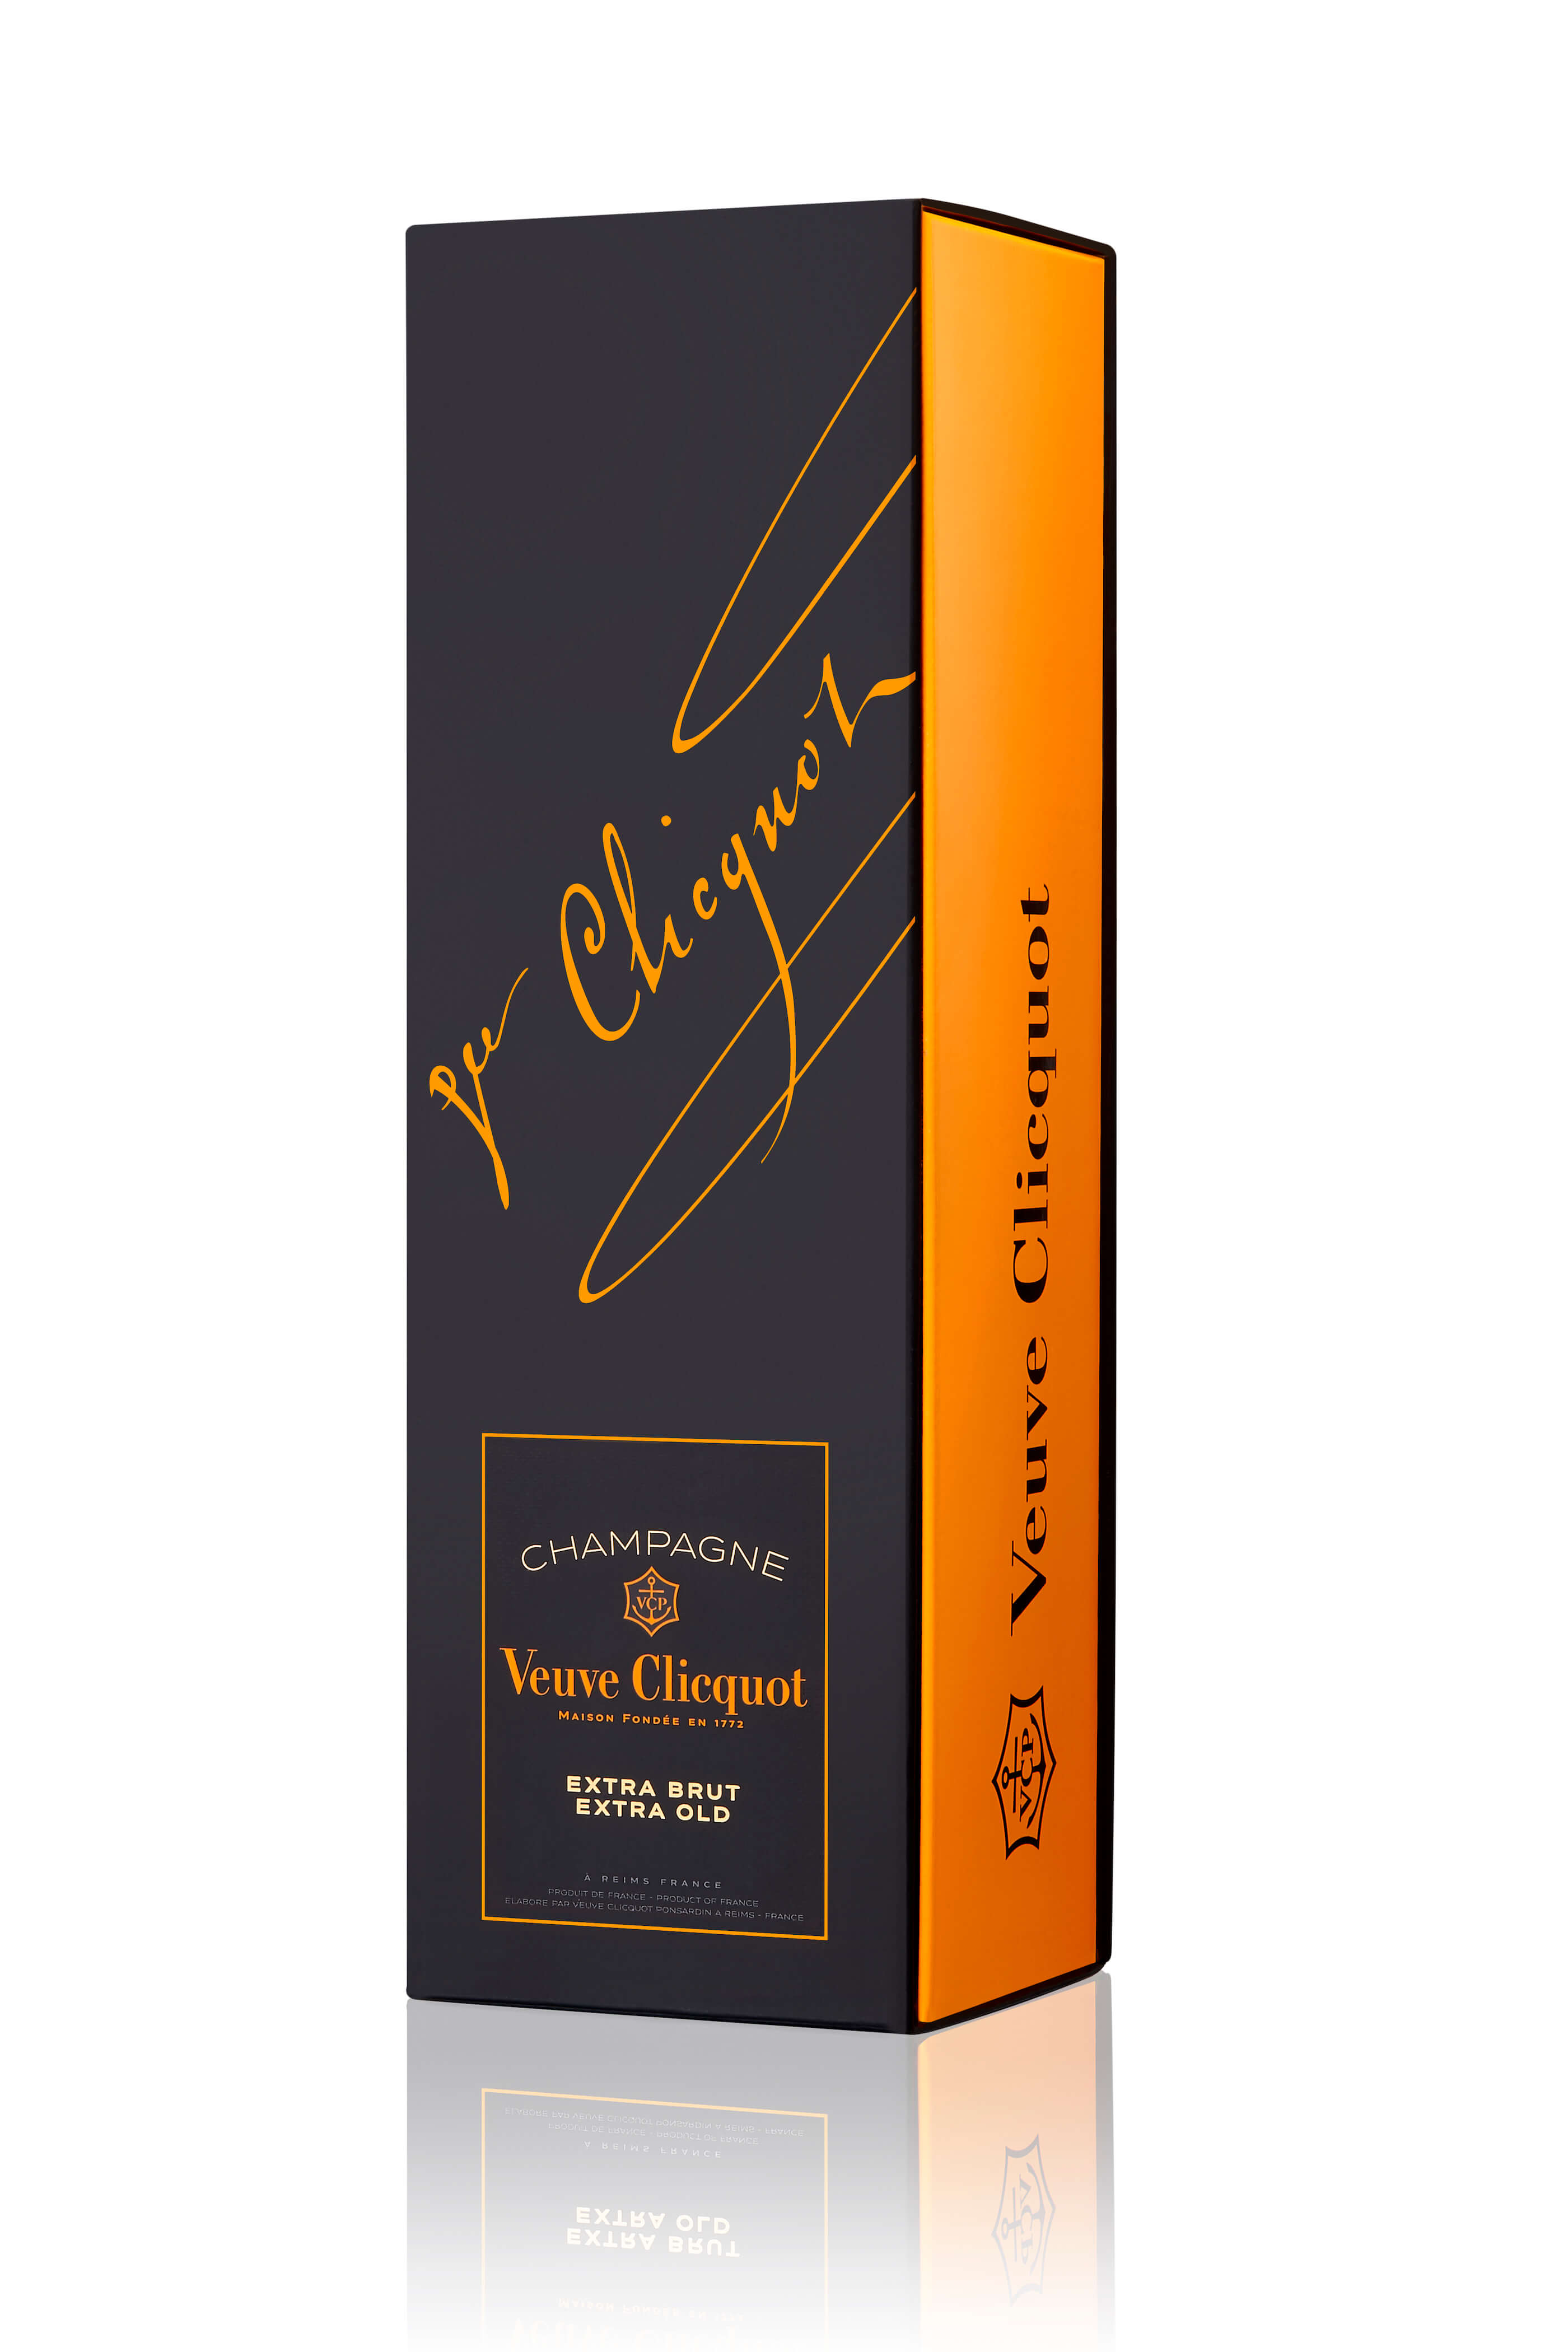 Veuve Clicquot Extra Brut Extra Old giftbox only